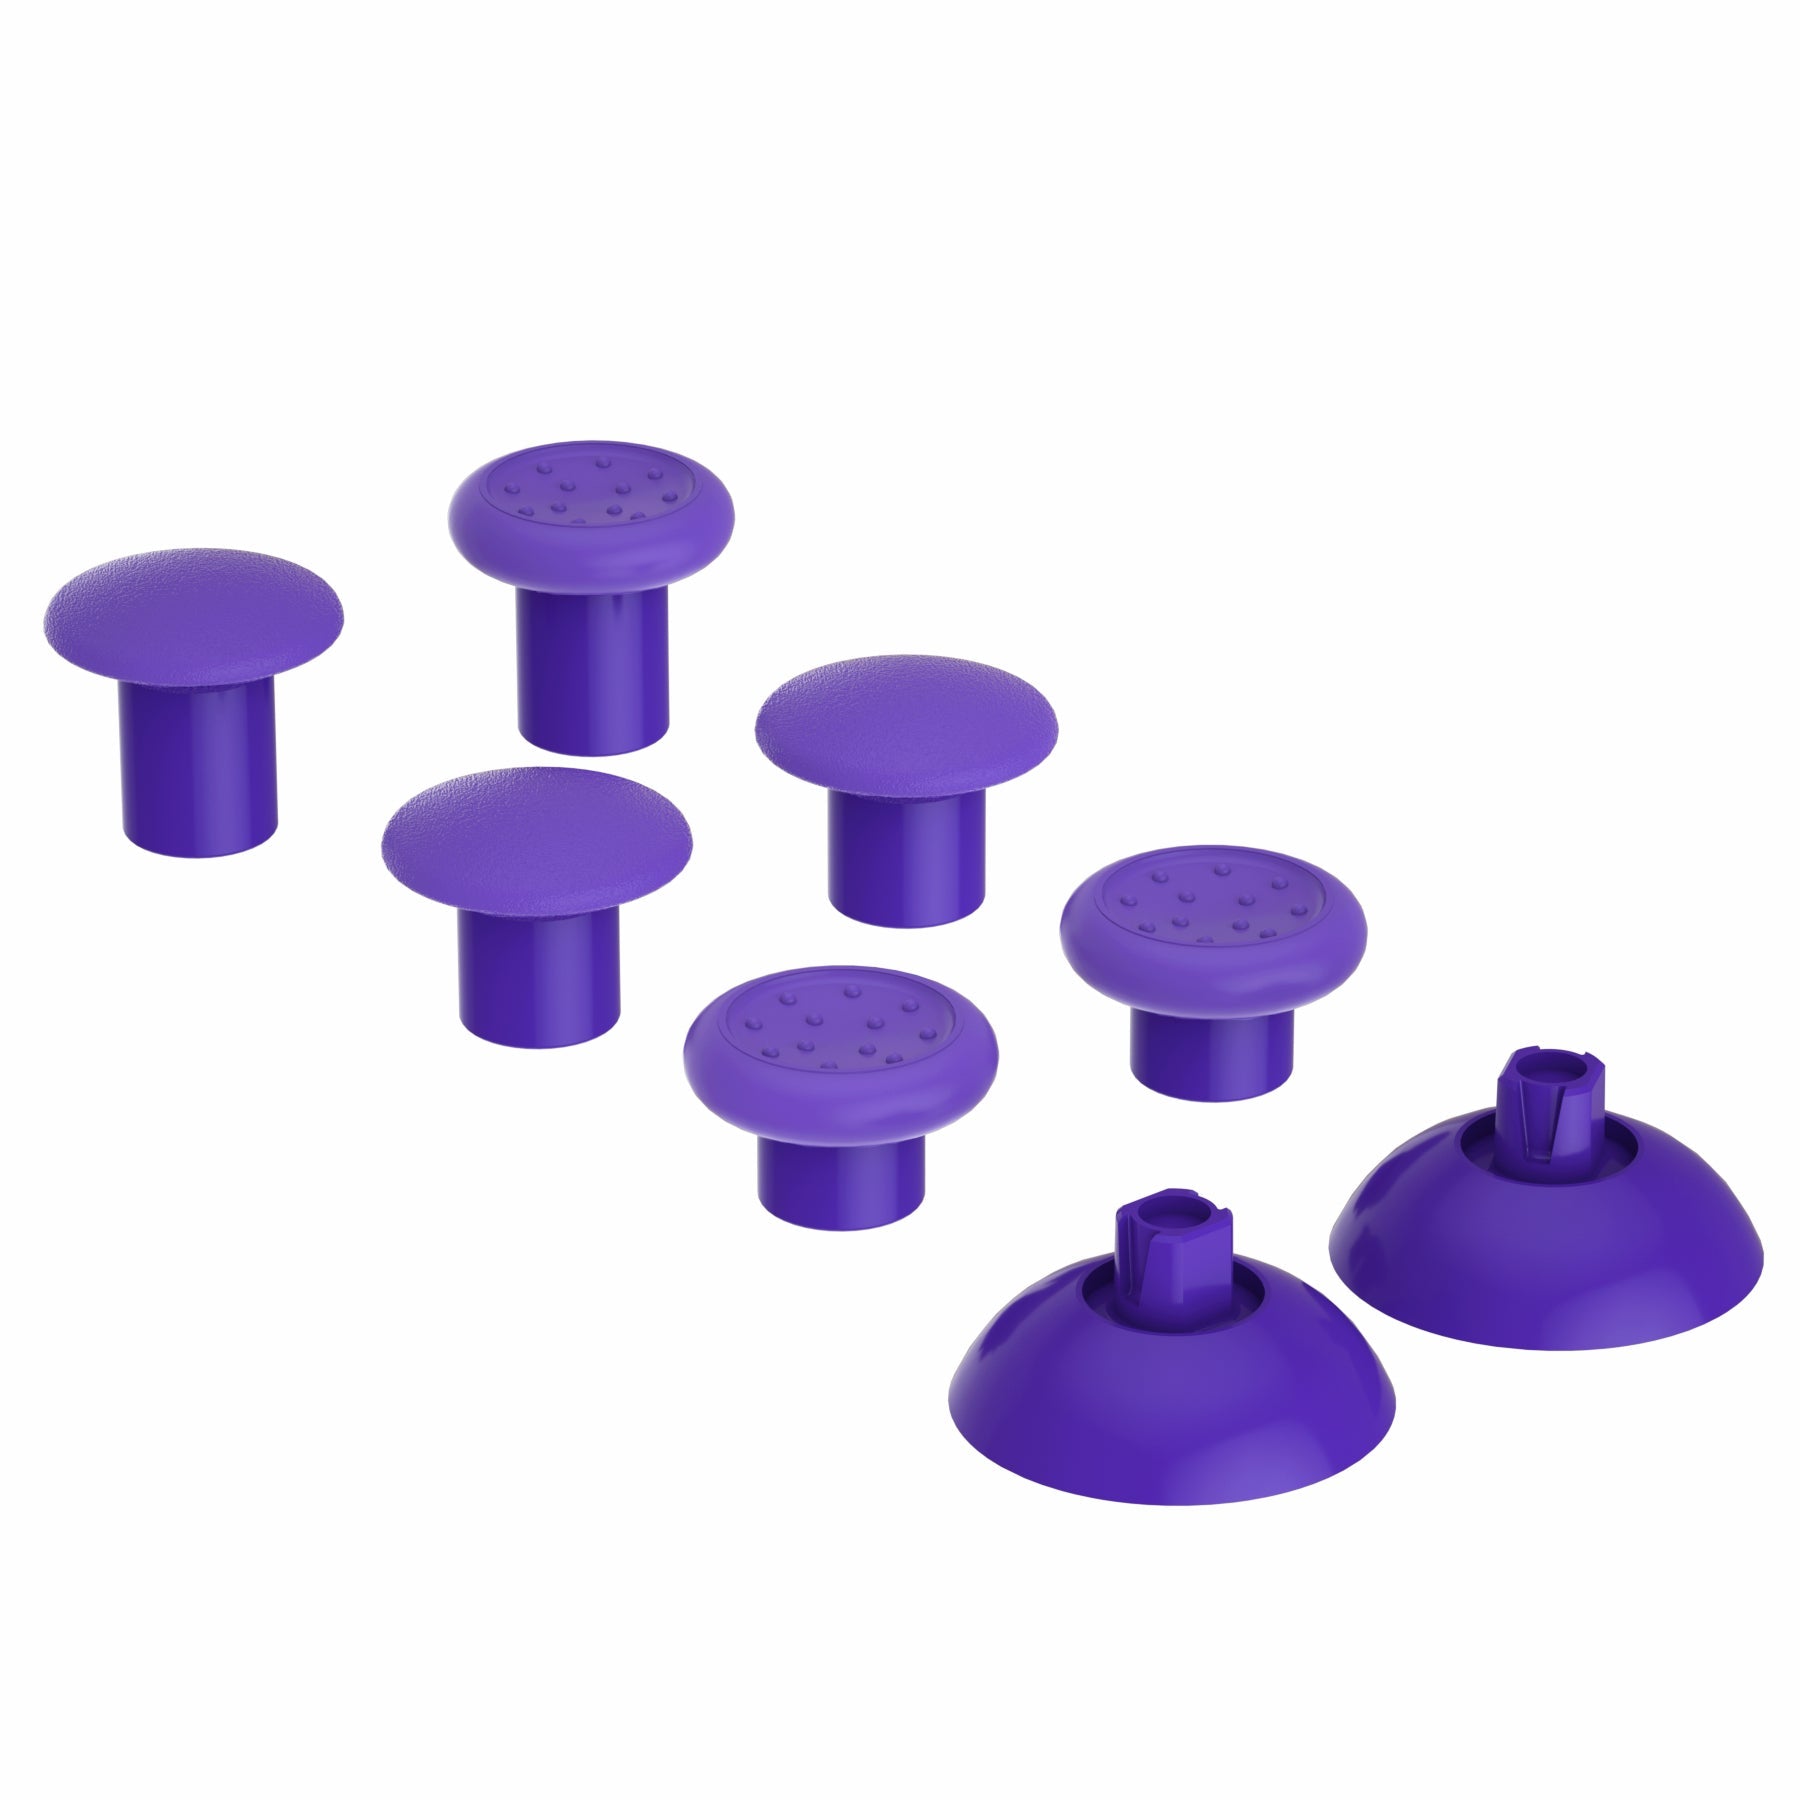 eXtremeRate Retail Purple ThumbsGear Interchangeable Ergonomic Thumbstick for ps5 Controller, for ps4 All Model Controller - 3 Height Domed and Concave Grips Adjustable Joystick - P4J1115